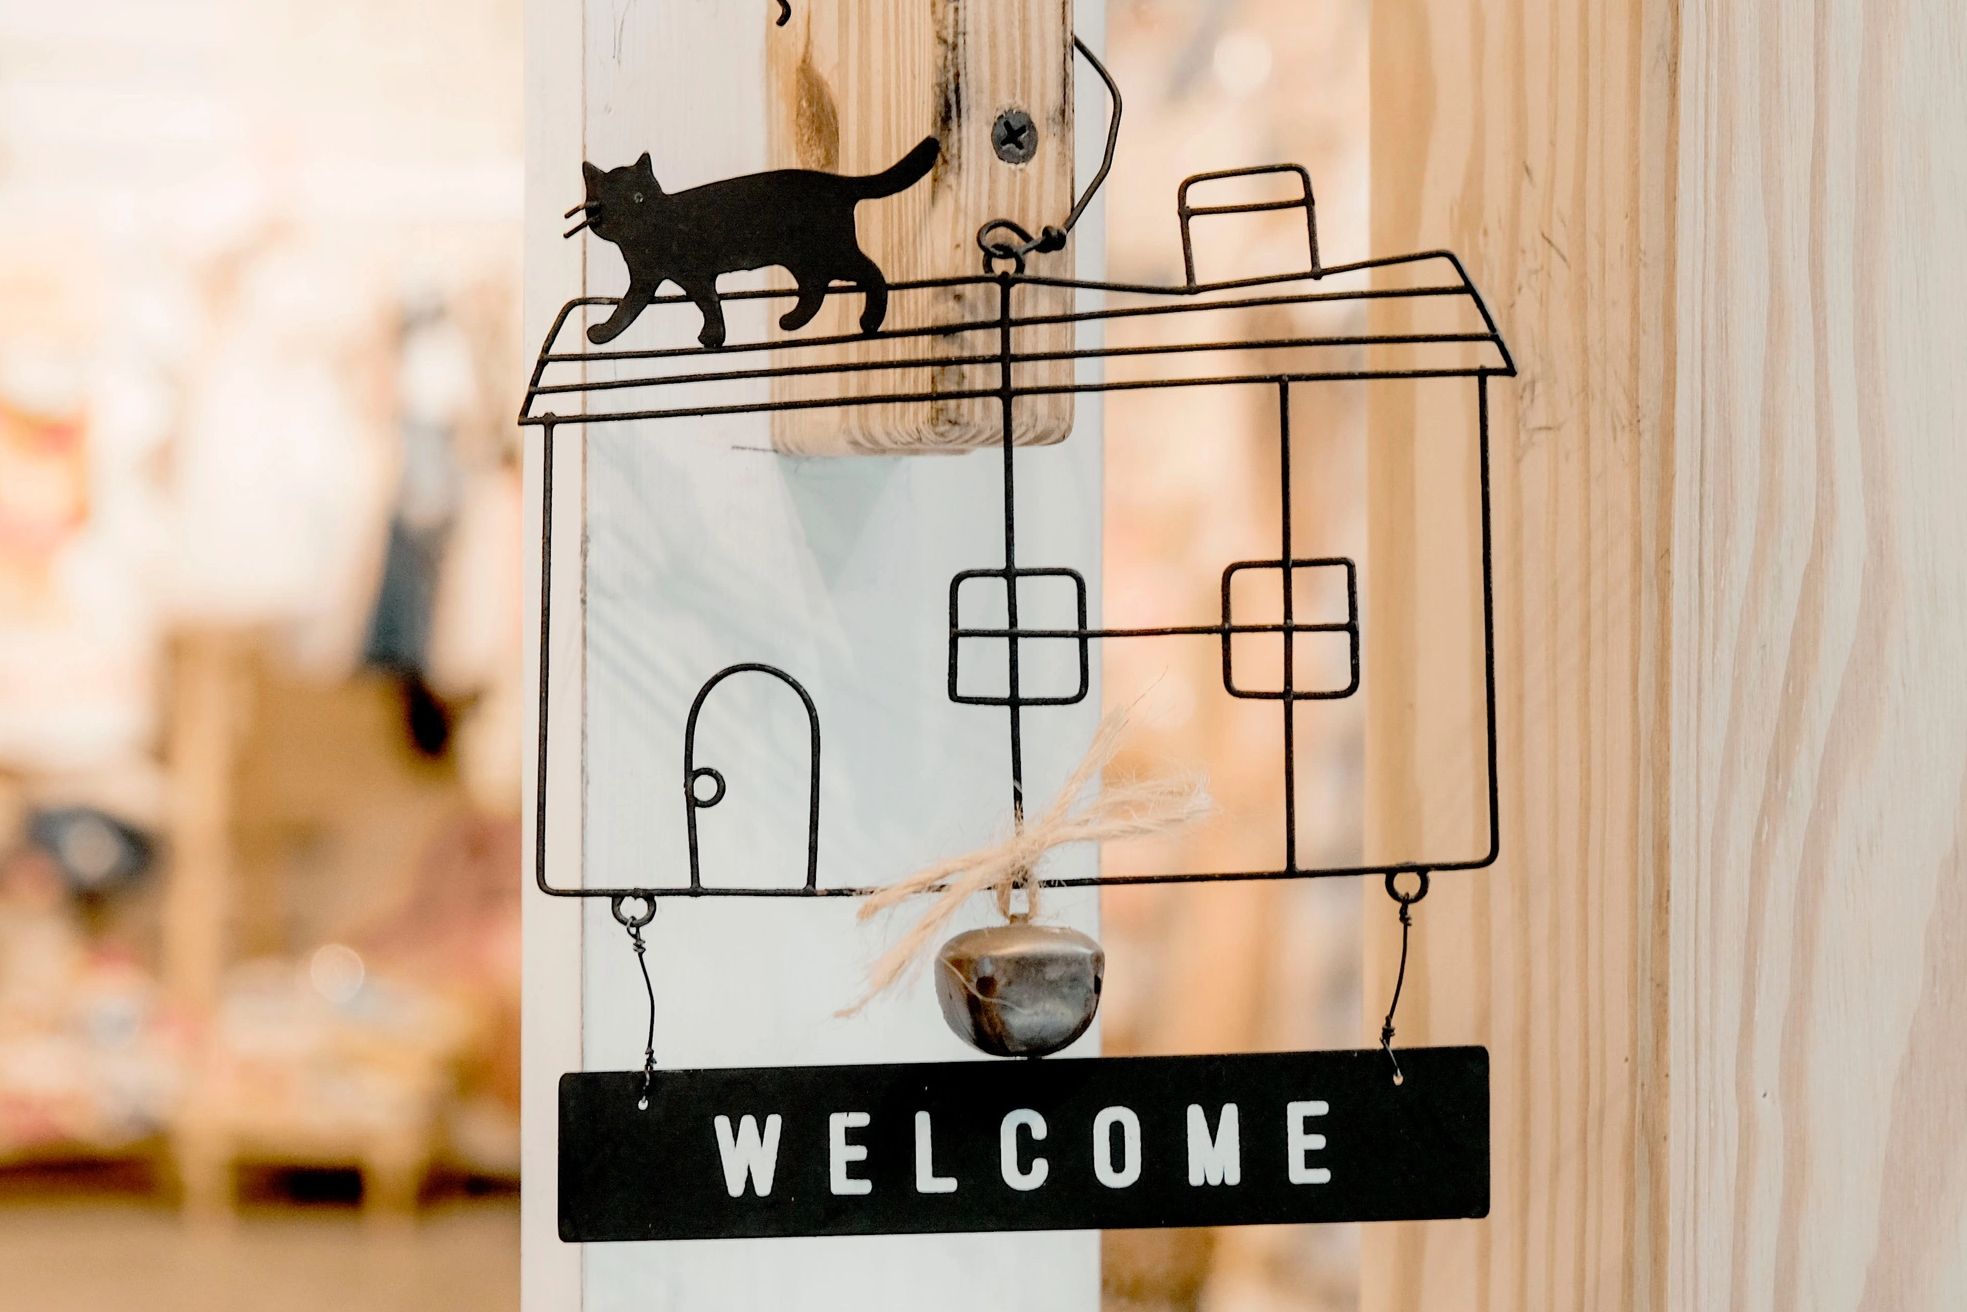 Photo by Henry & Co. from Pexels Welcome hanging sign